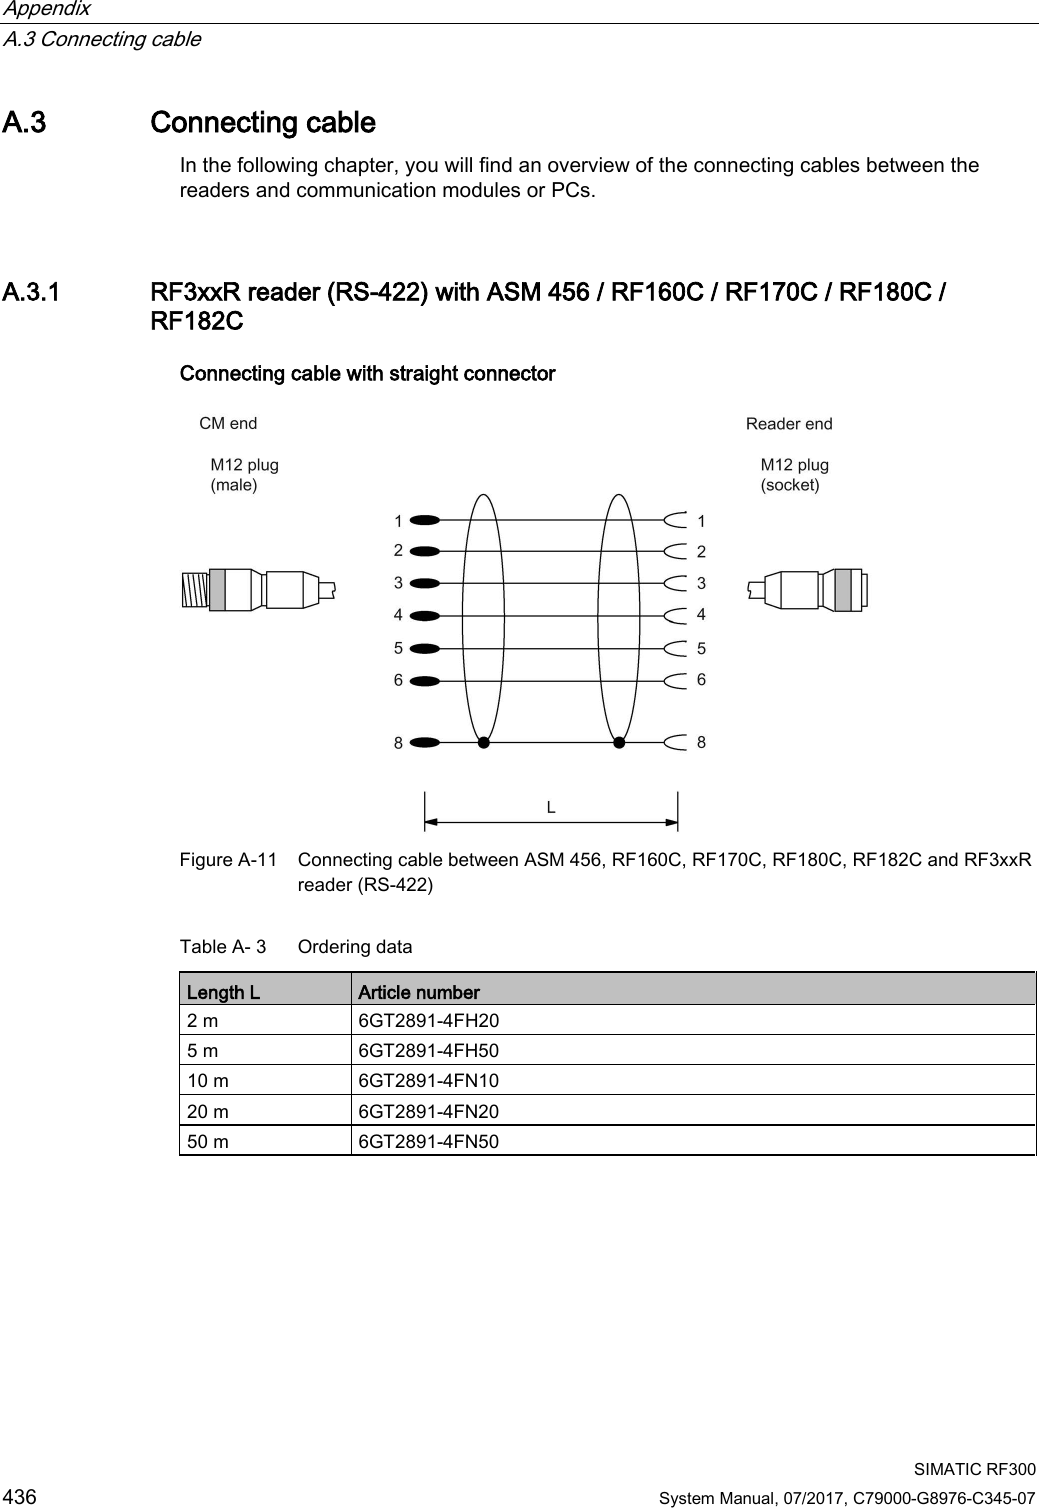 Appendix   A.3 Connecting cable  SIMATIC RF300 436 System Manual, 07/2017, C79000-G8976-C345-07 A.3 Connecting cable In the following chapter, you will find an overview of the connecting cables between the readers and communication modules or PCs.     A.3.1 RF3xxR reader (RS-422) with ASM 456 / RF160C / RF170C / RF180C / RF182C Connecting cable with straight connector  Figure A-11 Connecting cable between ASM 456, RF160C, RF170C, RF180C, RF182C and RF3xxR reader (RS-422) Table A- 3  Ordering data Length L Article number 2 m 6GT2891-4FH20 5 m 6GT2891-4FH50 10 m 6GT2891-4FN10 20 m 6GT2891-4FN20 50 m 6GT2891-4FN50    